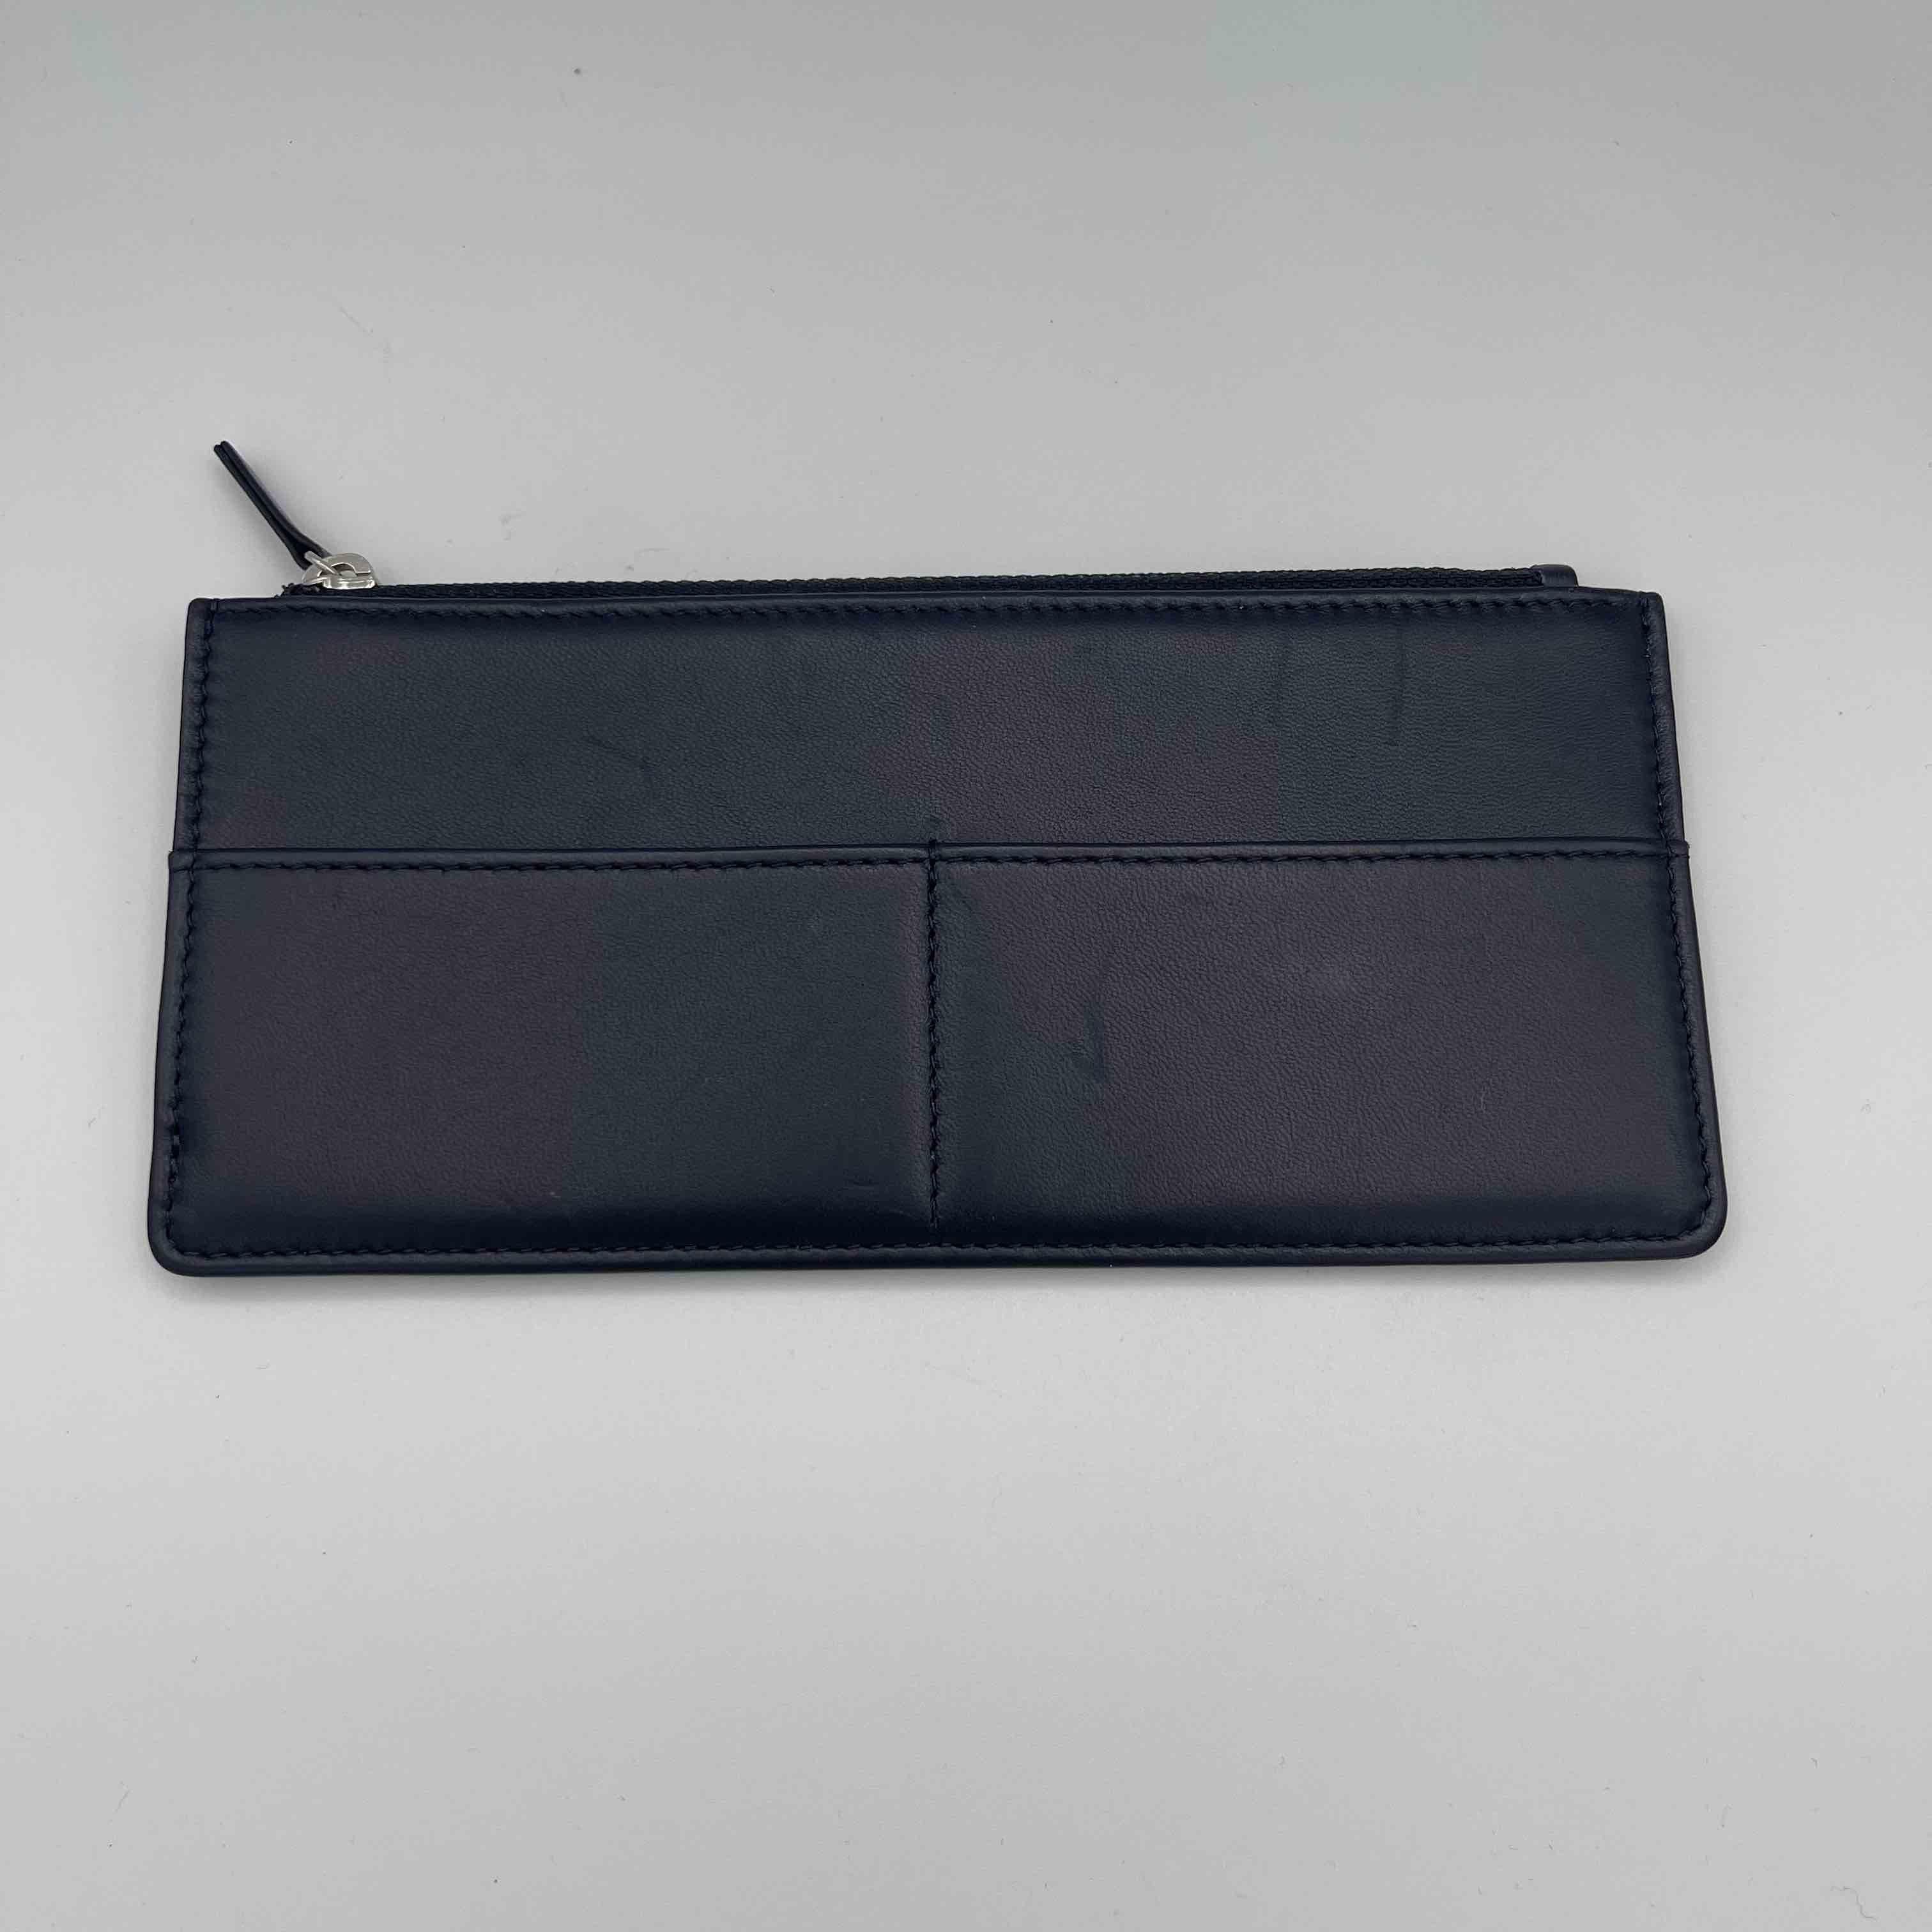 CHANEL midnight blue leather card holder. The hardware is in pale gilt metal.
In very good condition.
Made in Italy.
Dimensions: 19 x 8.5cm

Will be delivered in a non-original dustbag.